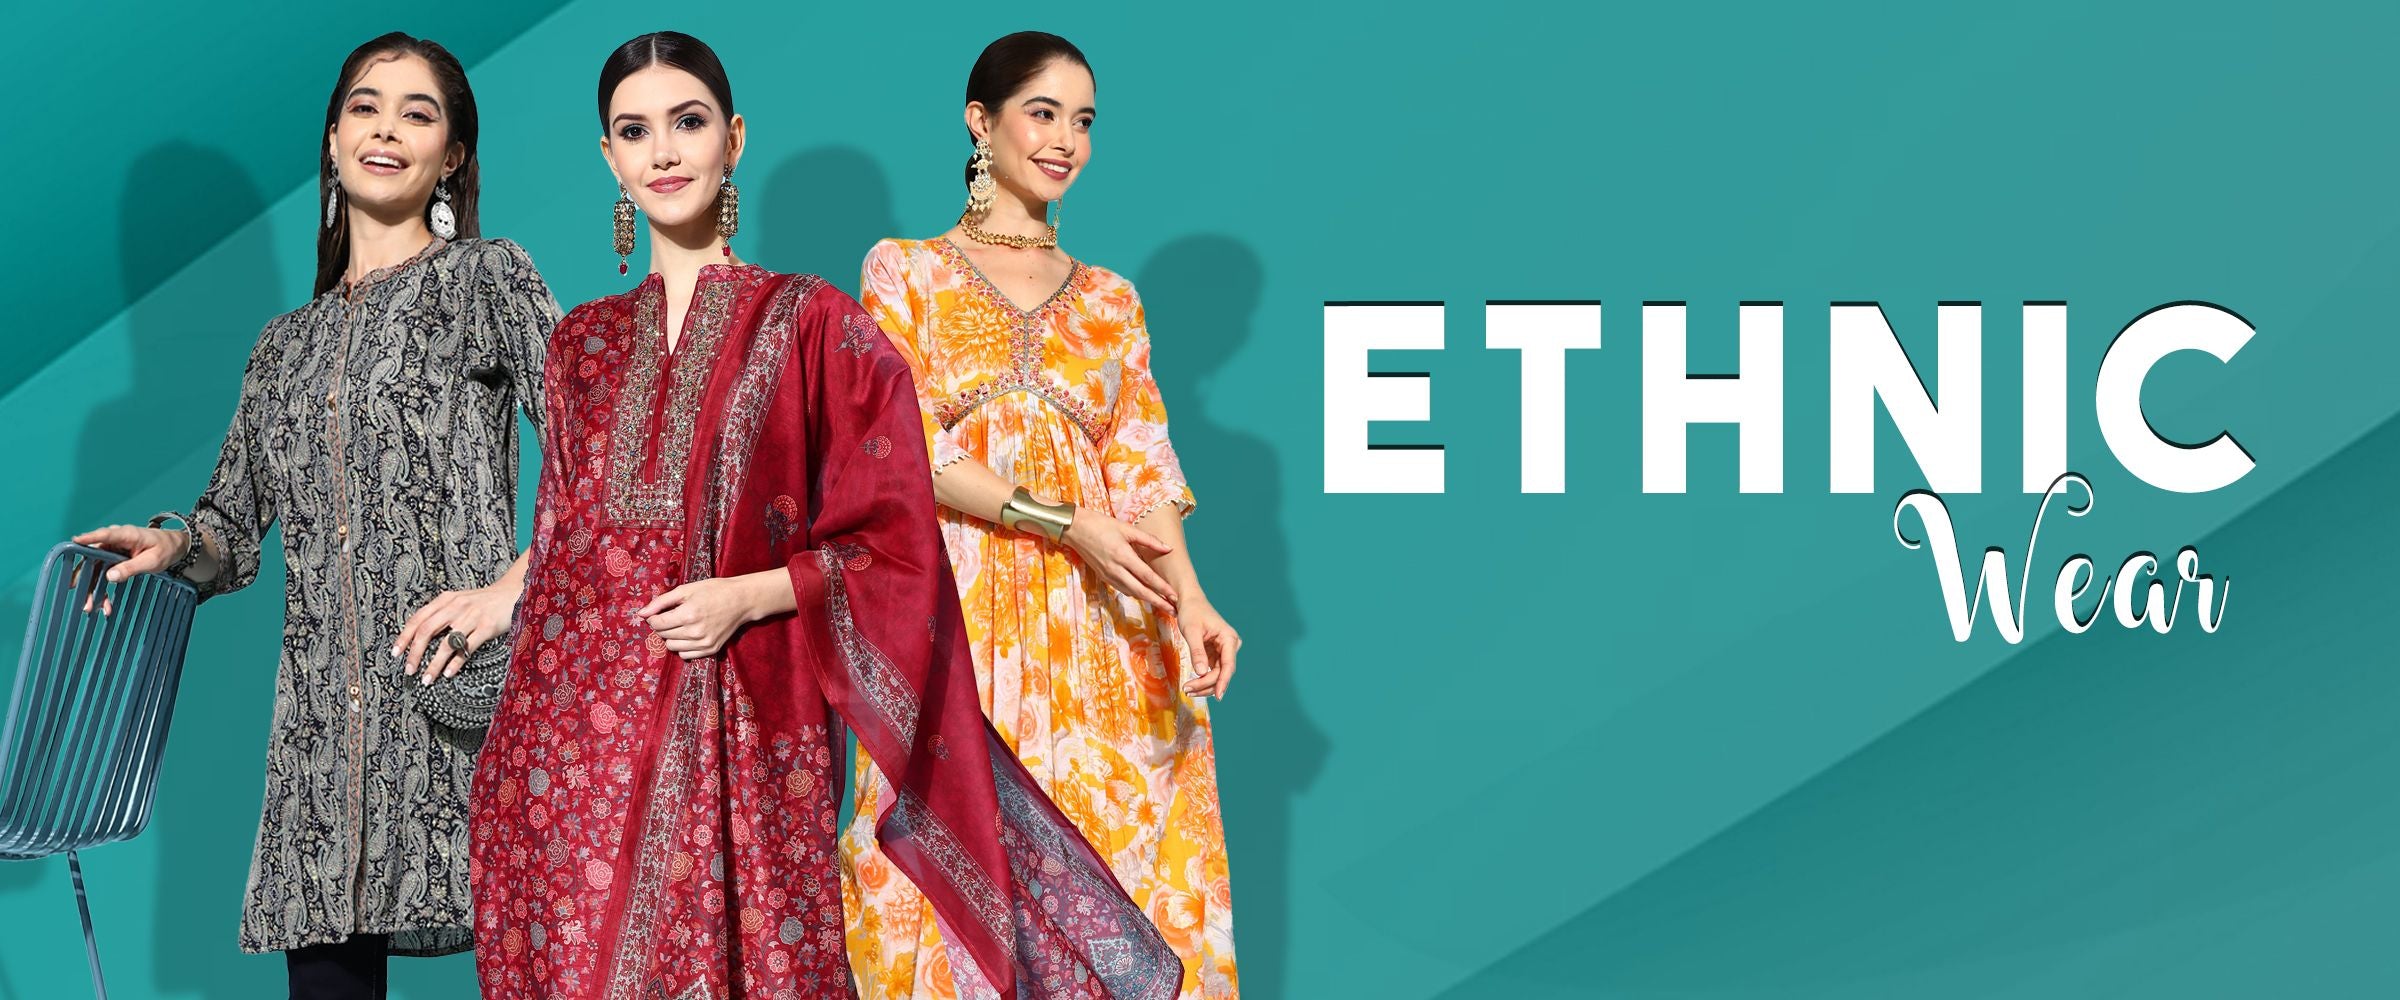 What are some of the best online sites for ethnic wear? - Quora